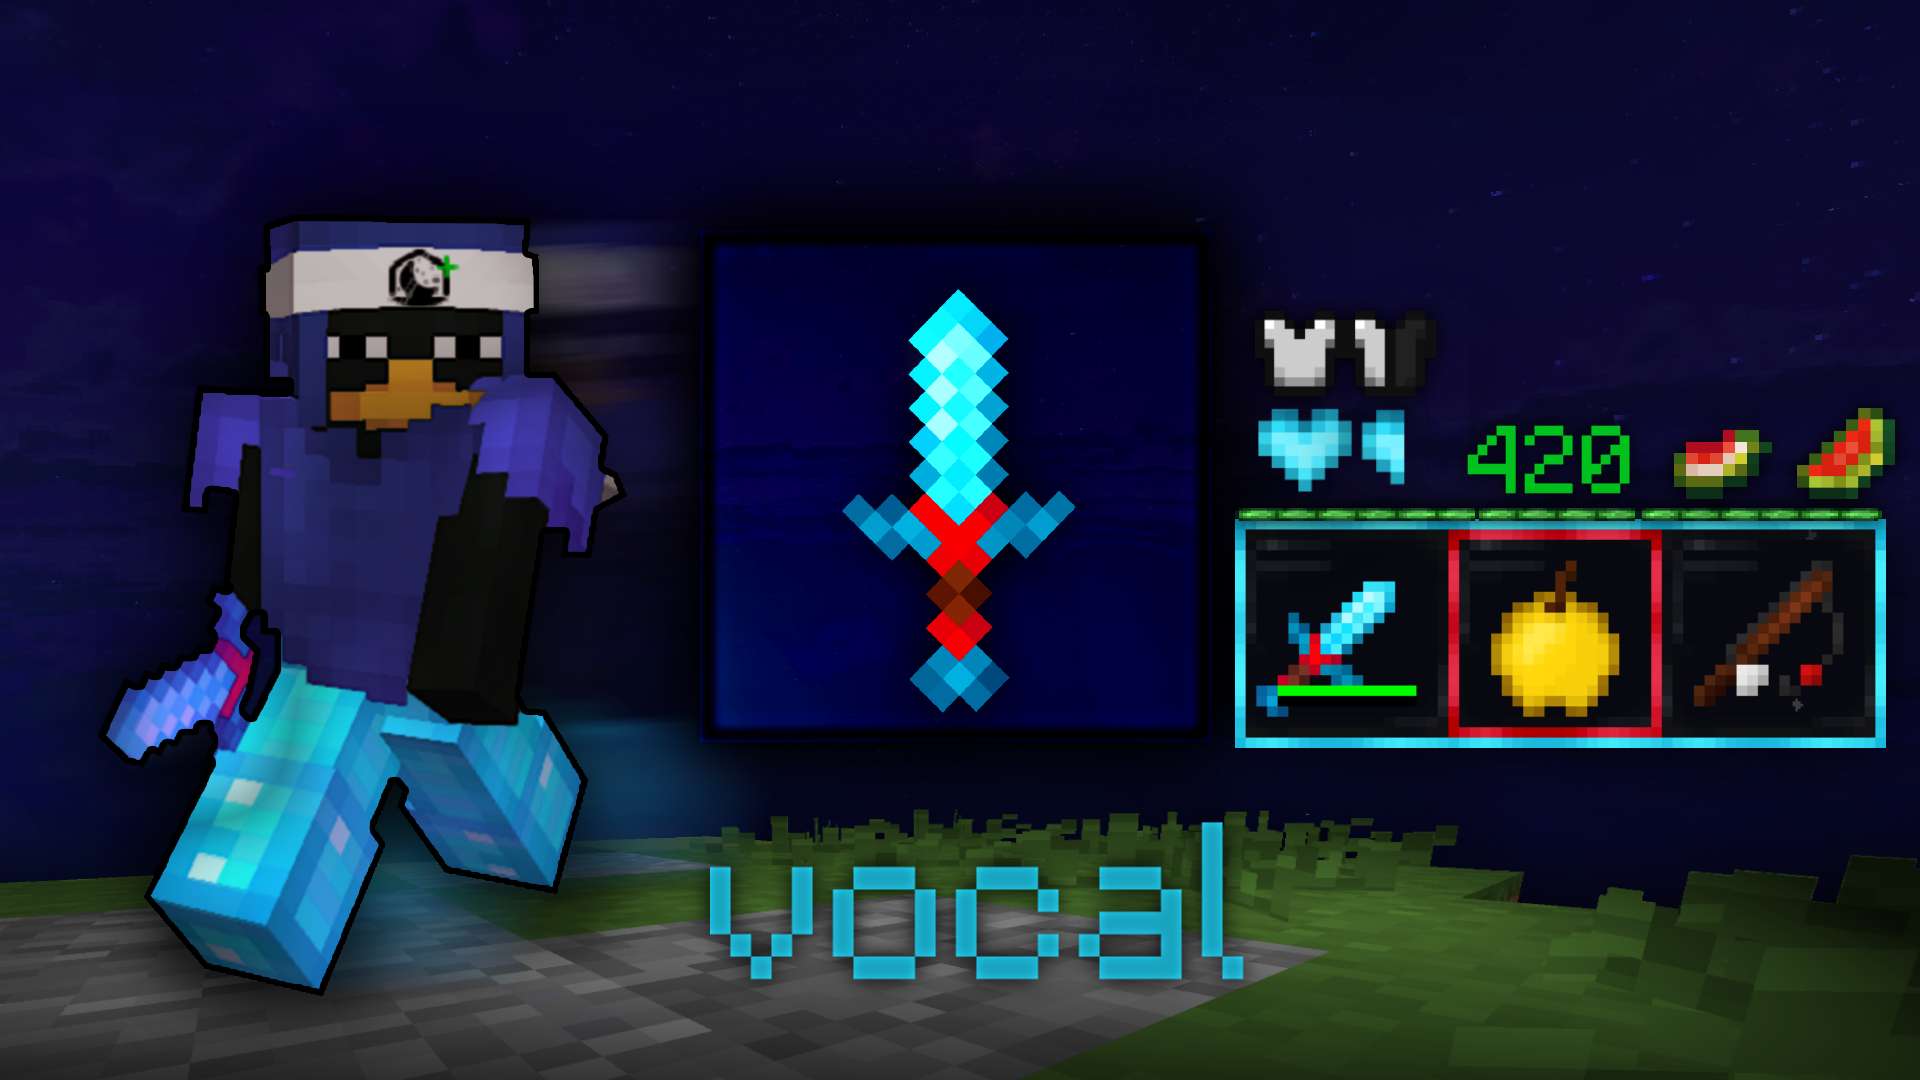 Vocal 16x by voice on PvPRP